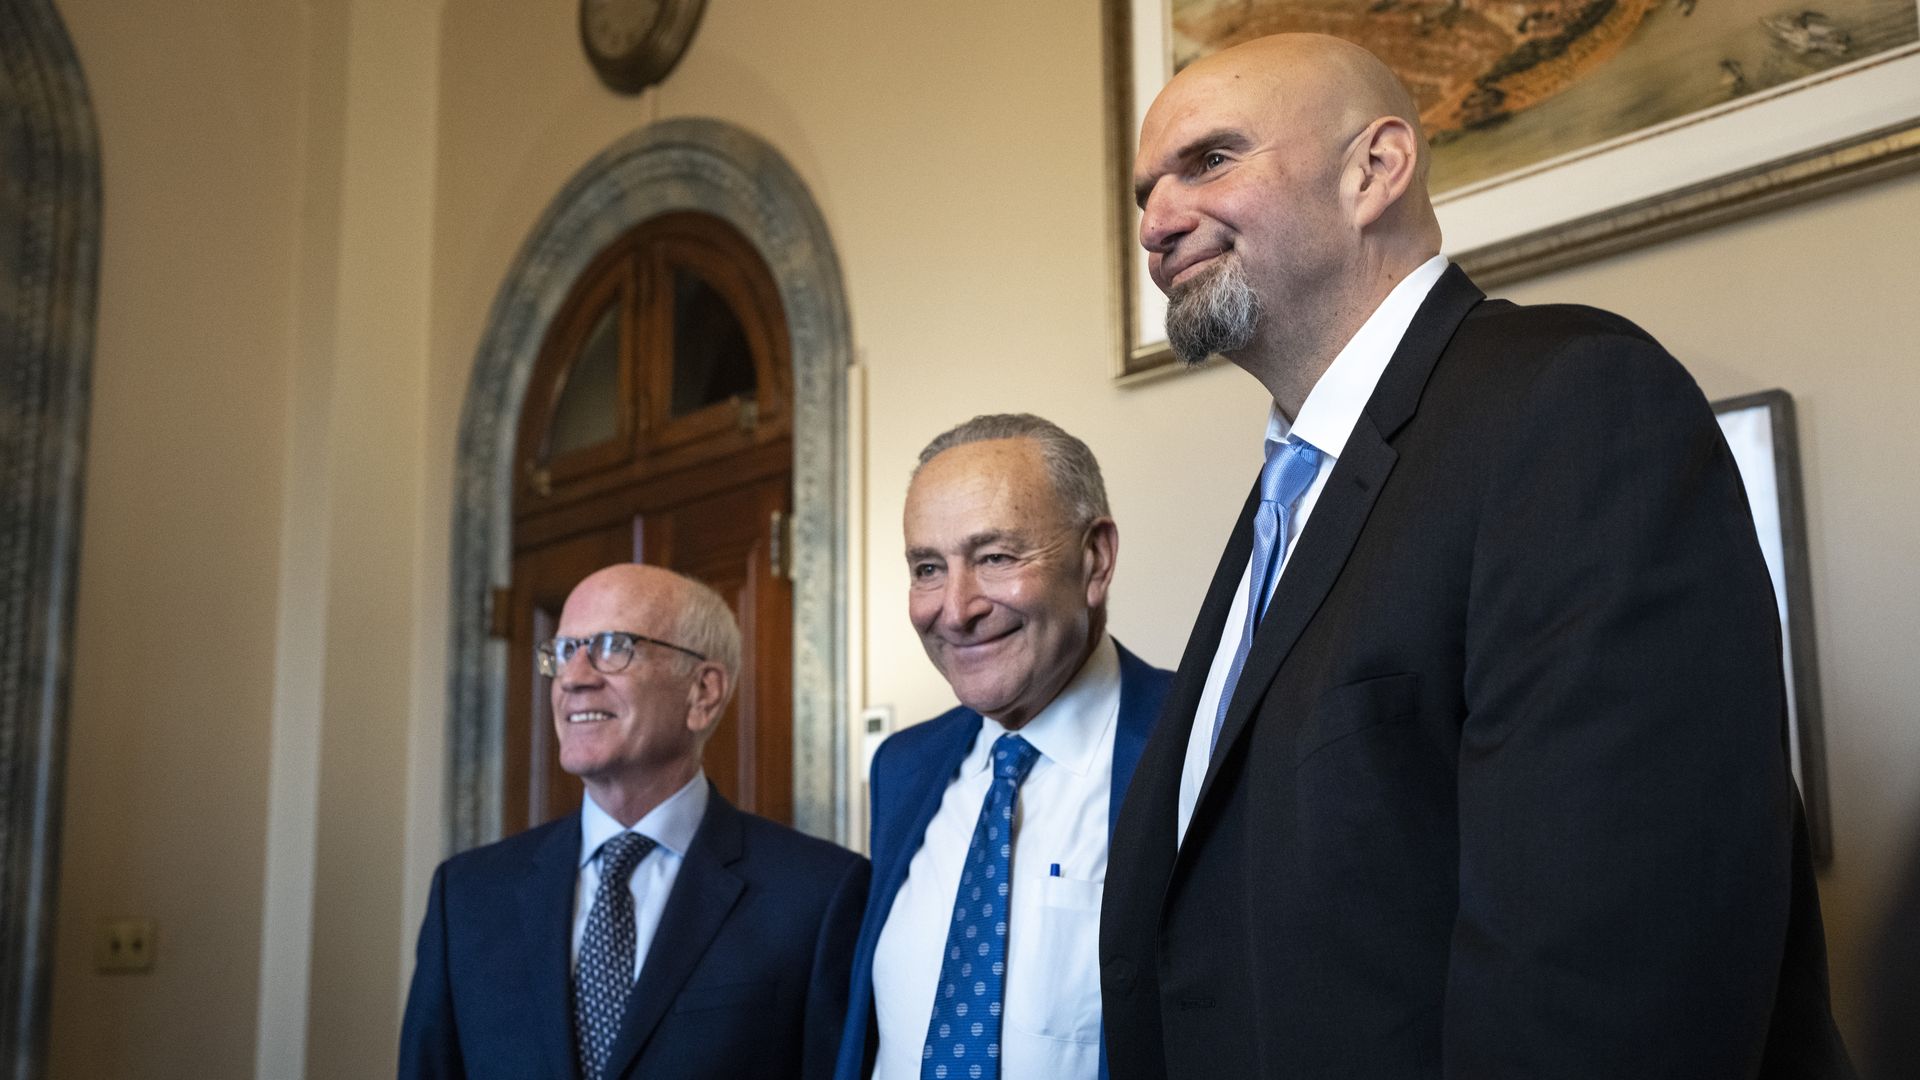 John Fetterman towers over Chuck Schumer and Peter Welch